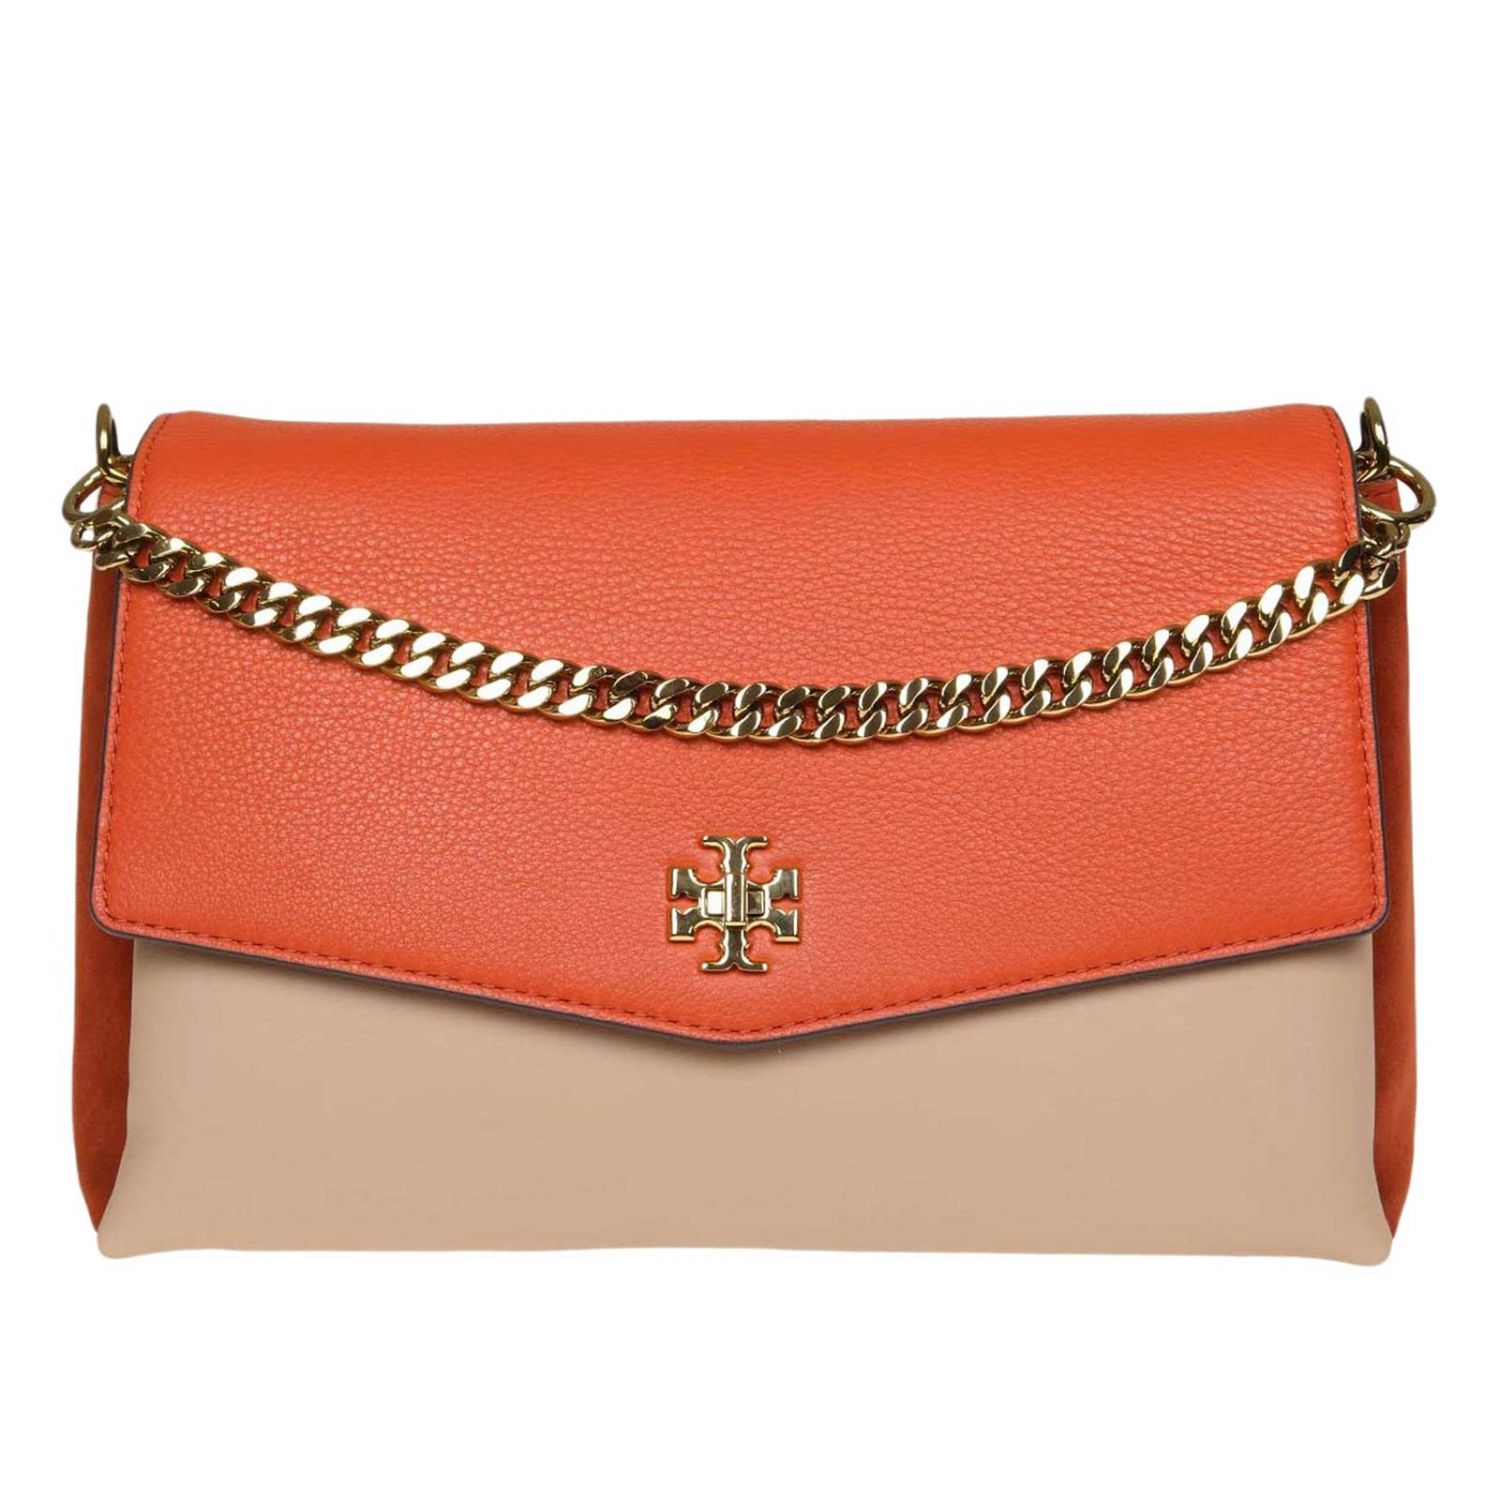 Tory Burch Outlet: crossbody bags for woman - Coral | Tory Burch ...